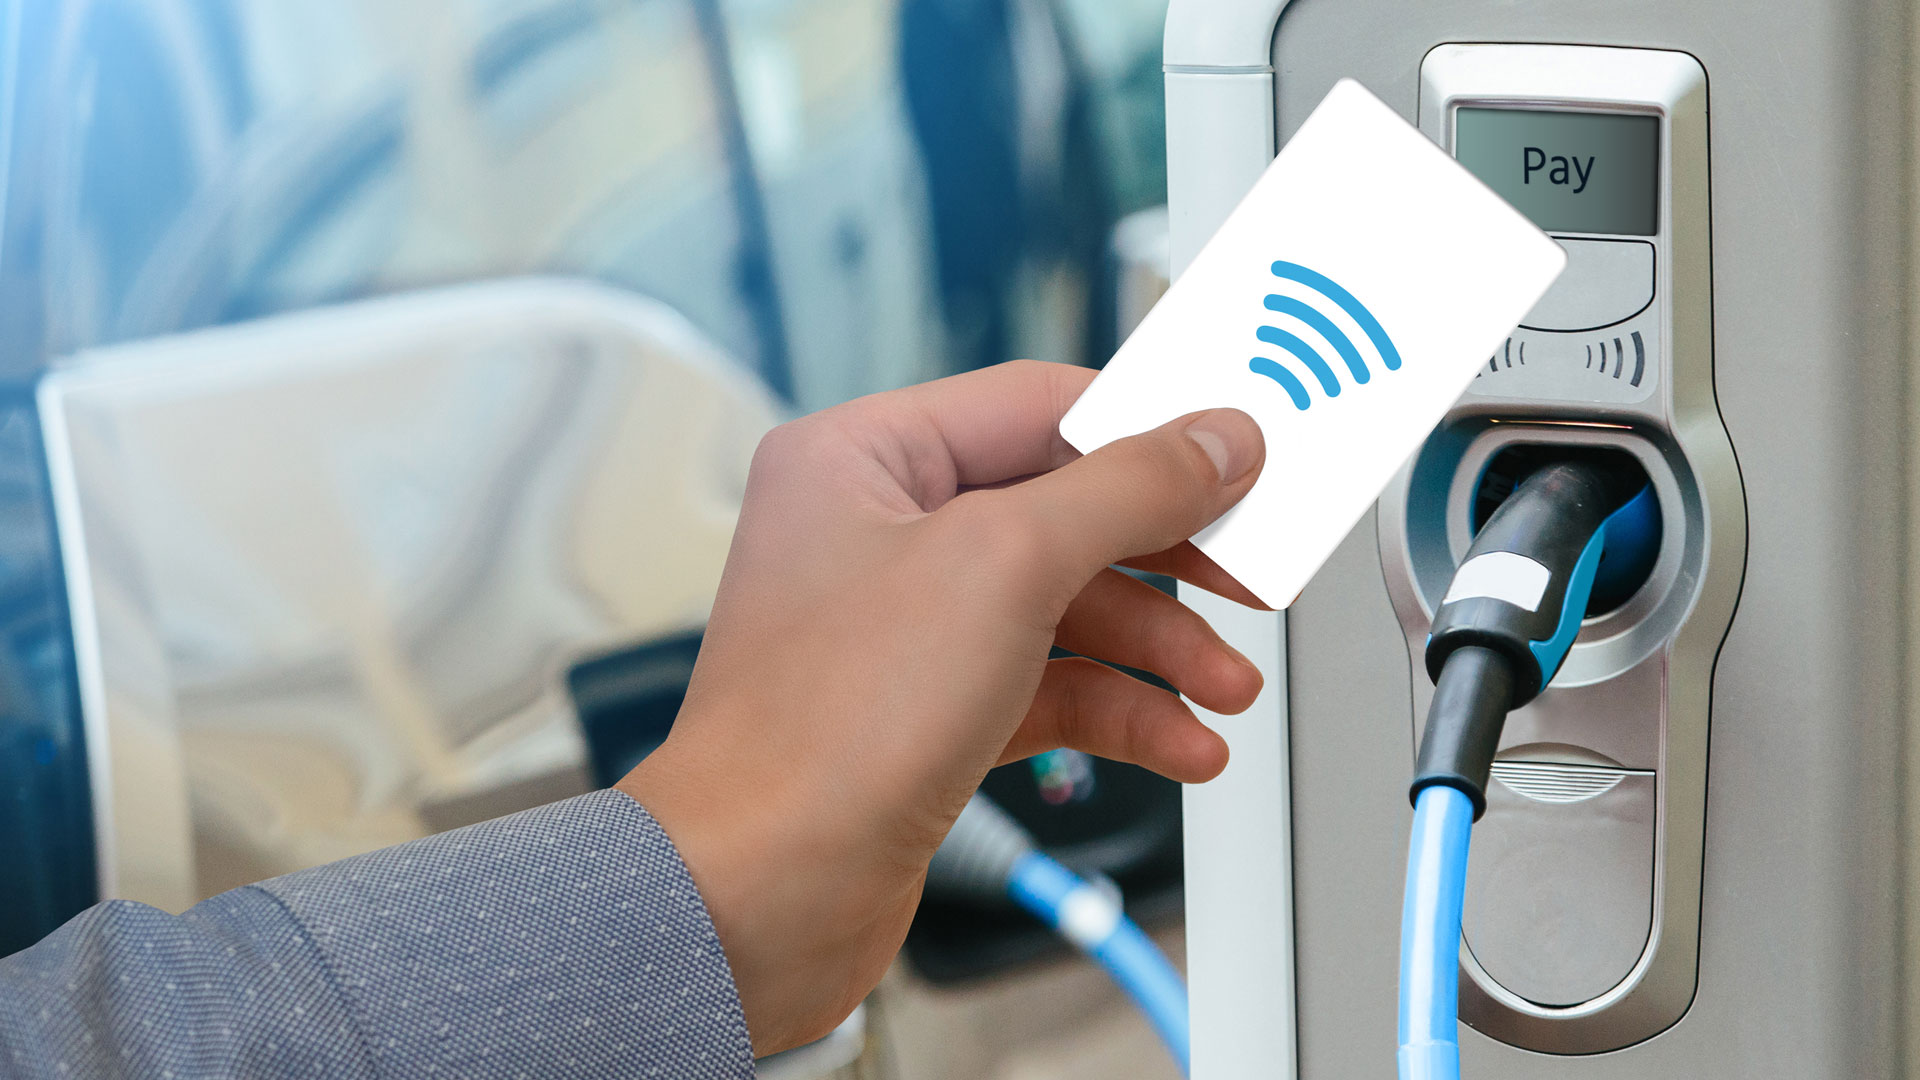 UK rapid charge points to accept card payments by 2020